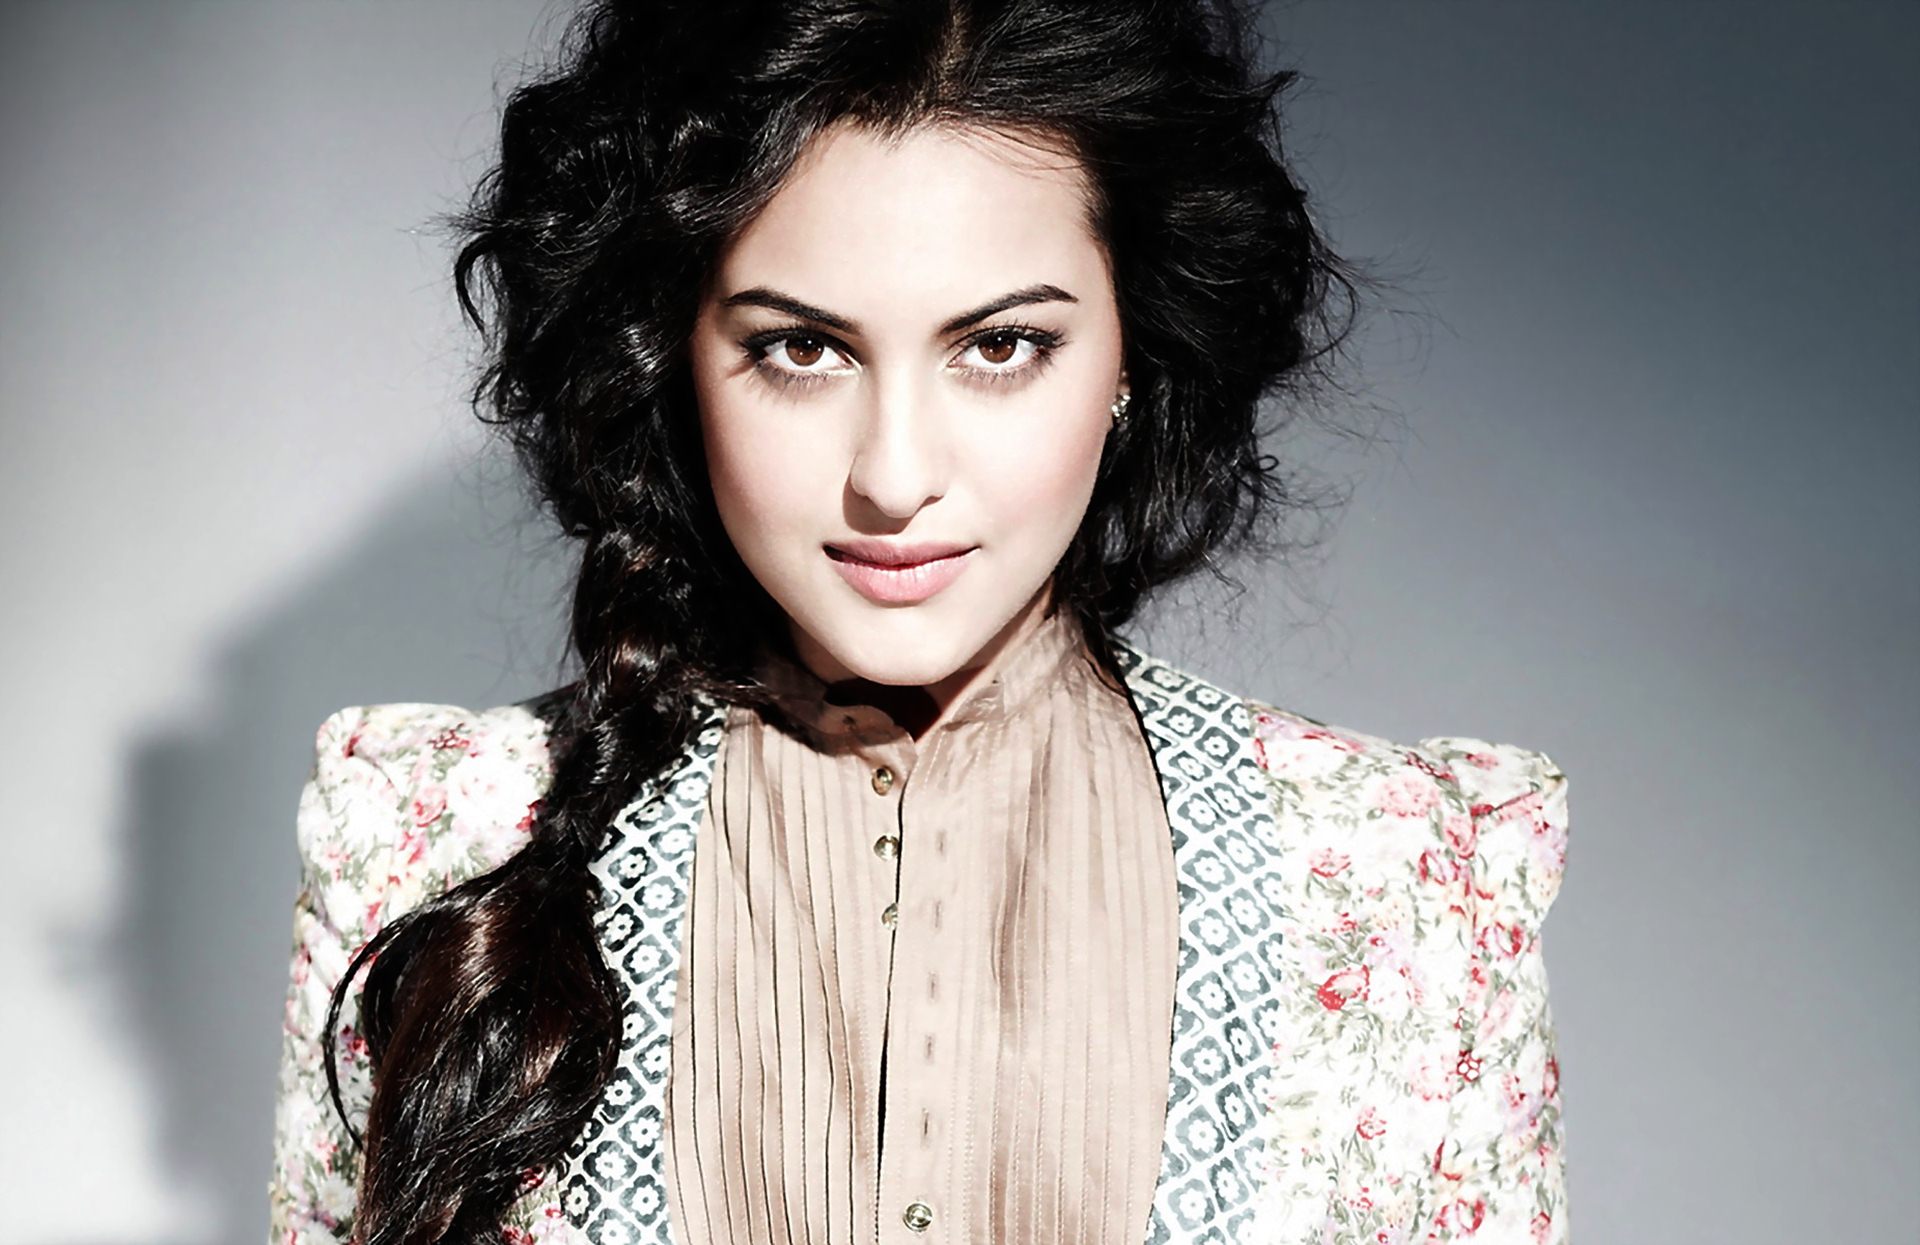 sonakshi sinha wallpapers full size,hair,face,fashion model,hairstyle,lip